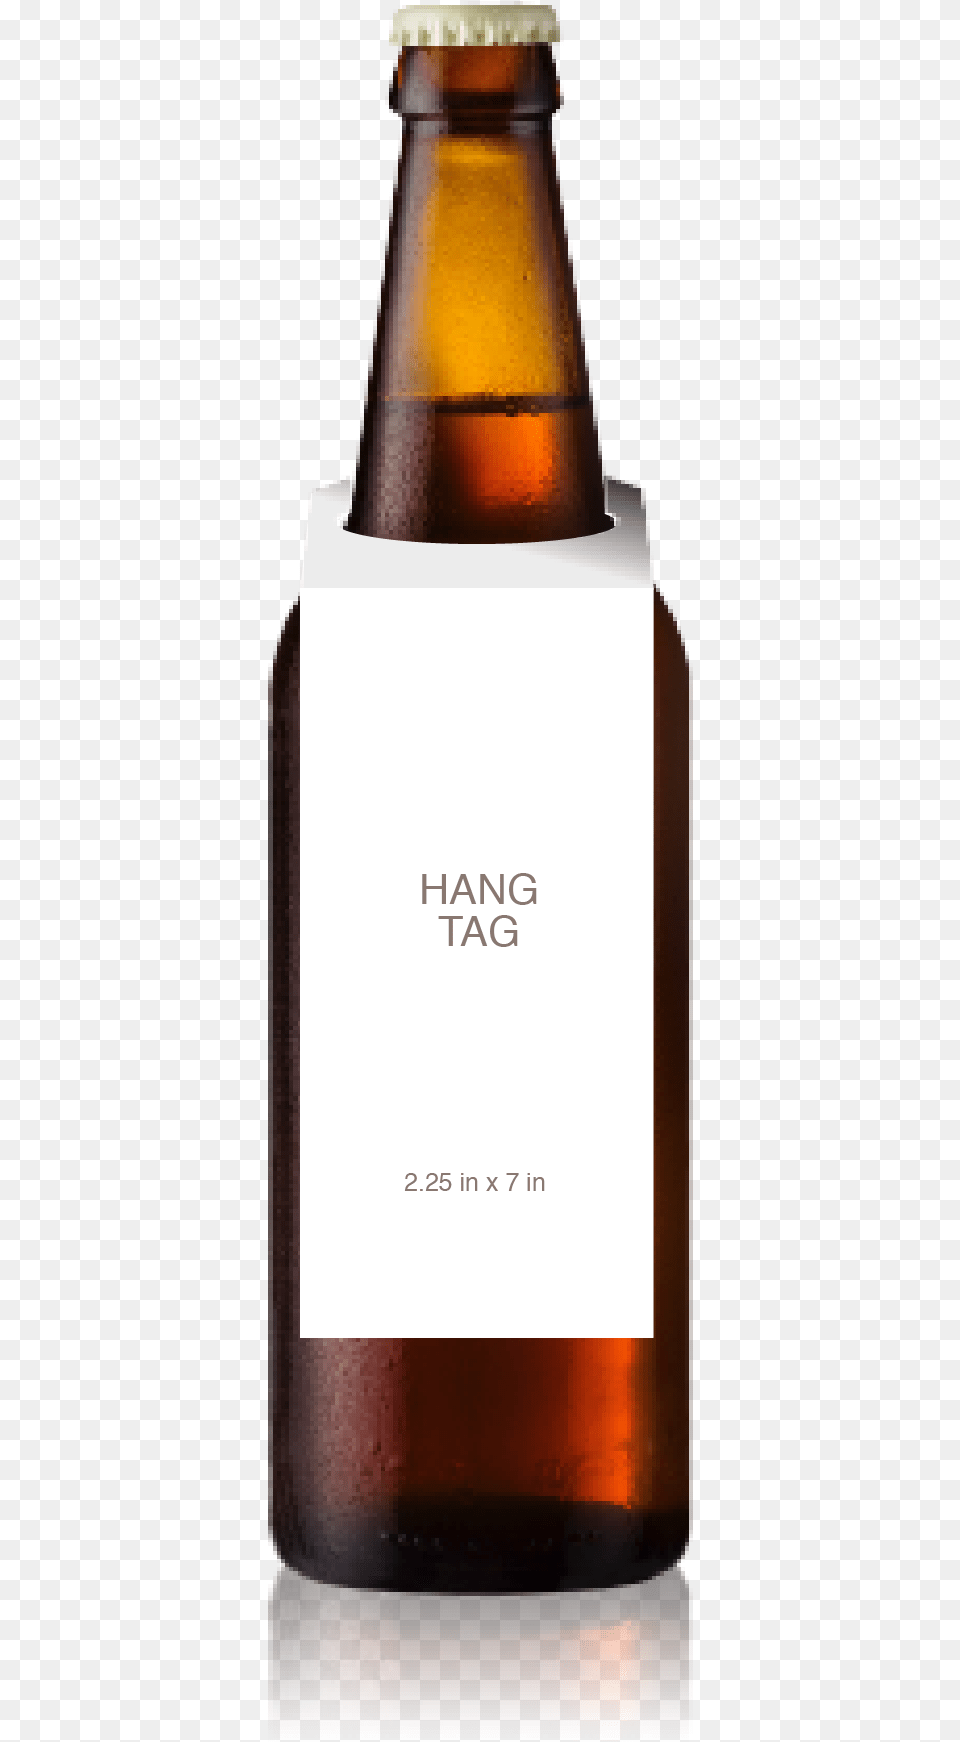 Tall Bottle With A Blank Hangtag From Crushtag Old Worthy Leithers39 Cure For Scurvy Pale Ale Beer, Alcohol, Beer Bottle, Beverage, Liquor Free Png